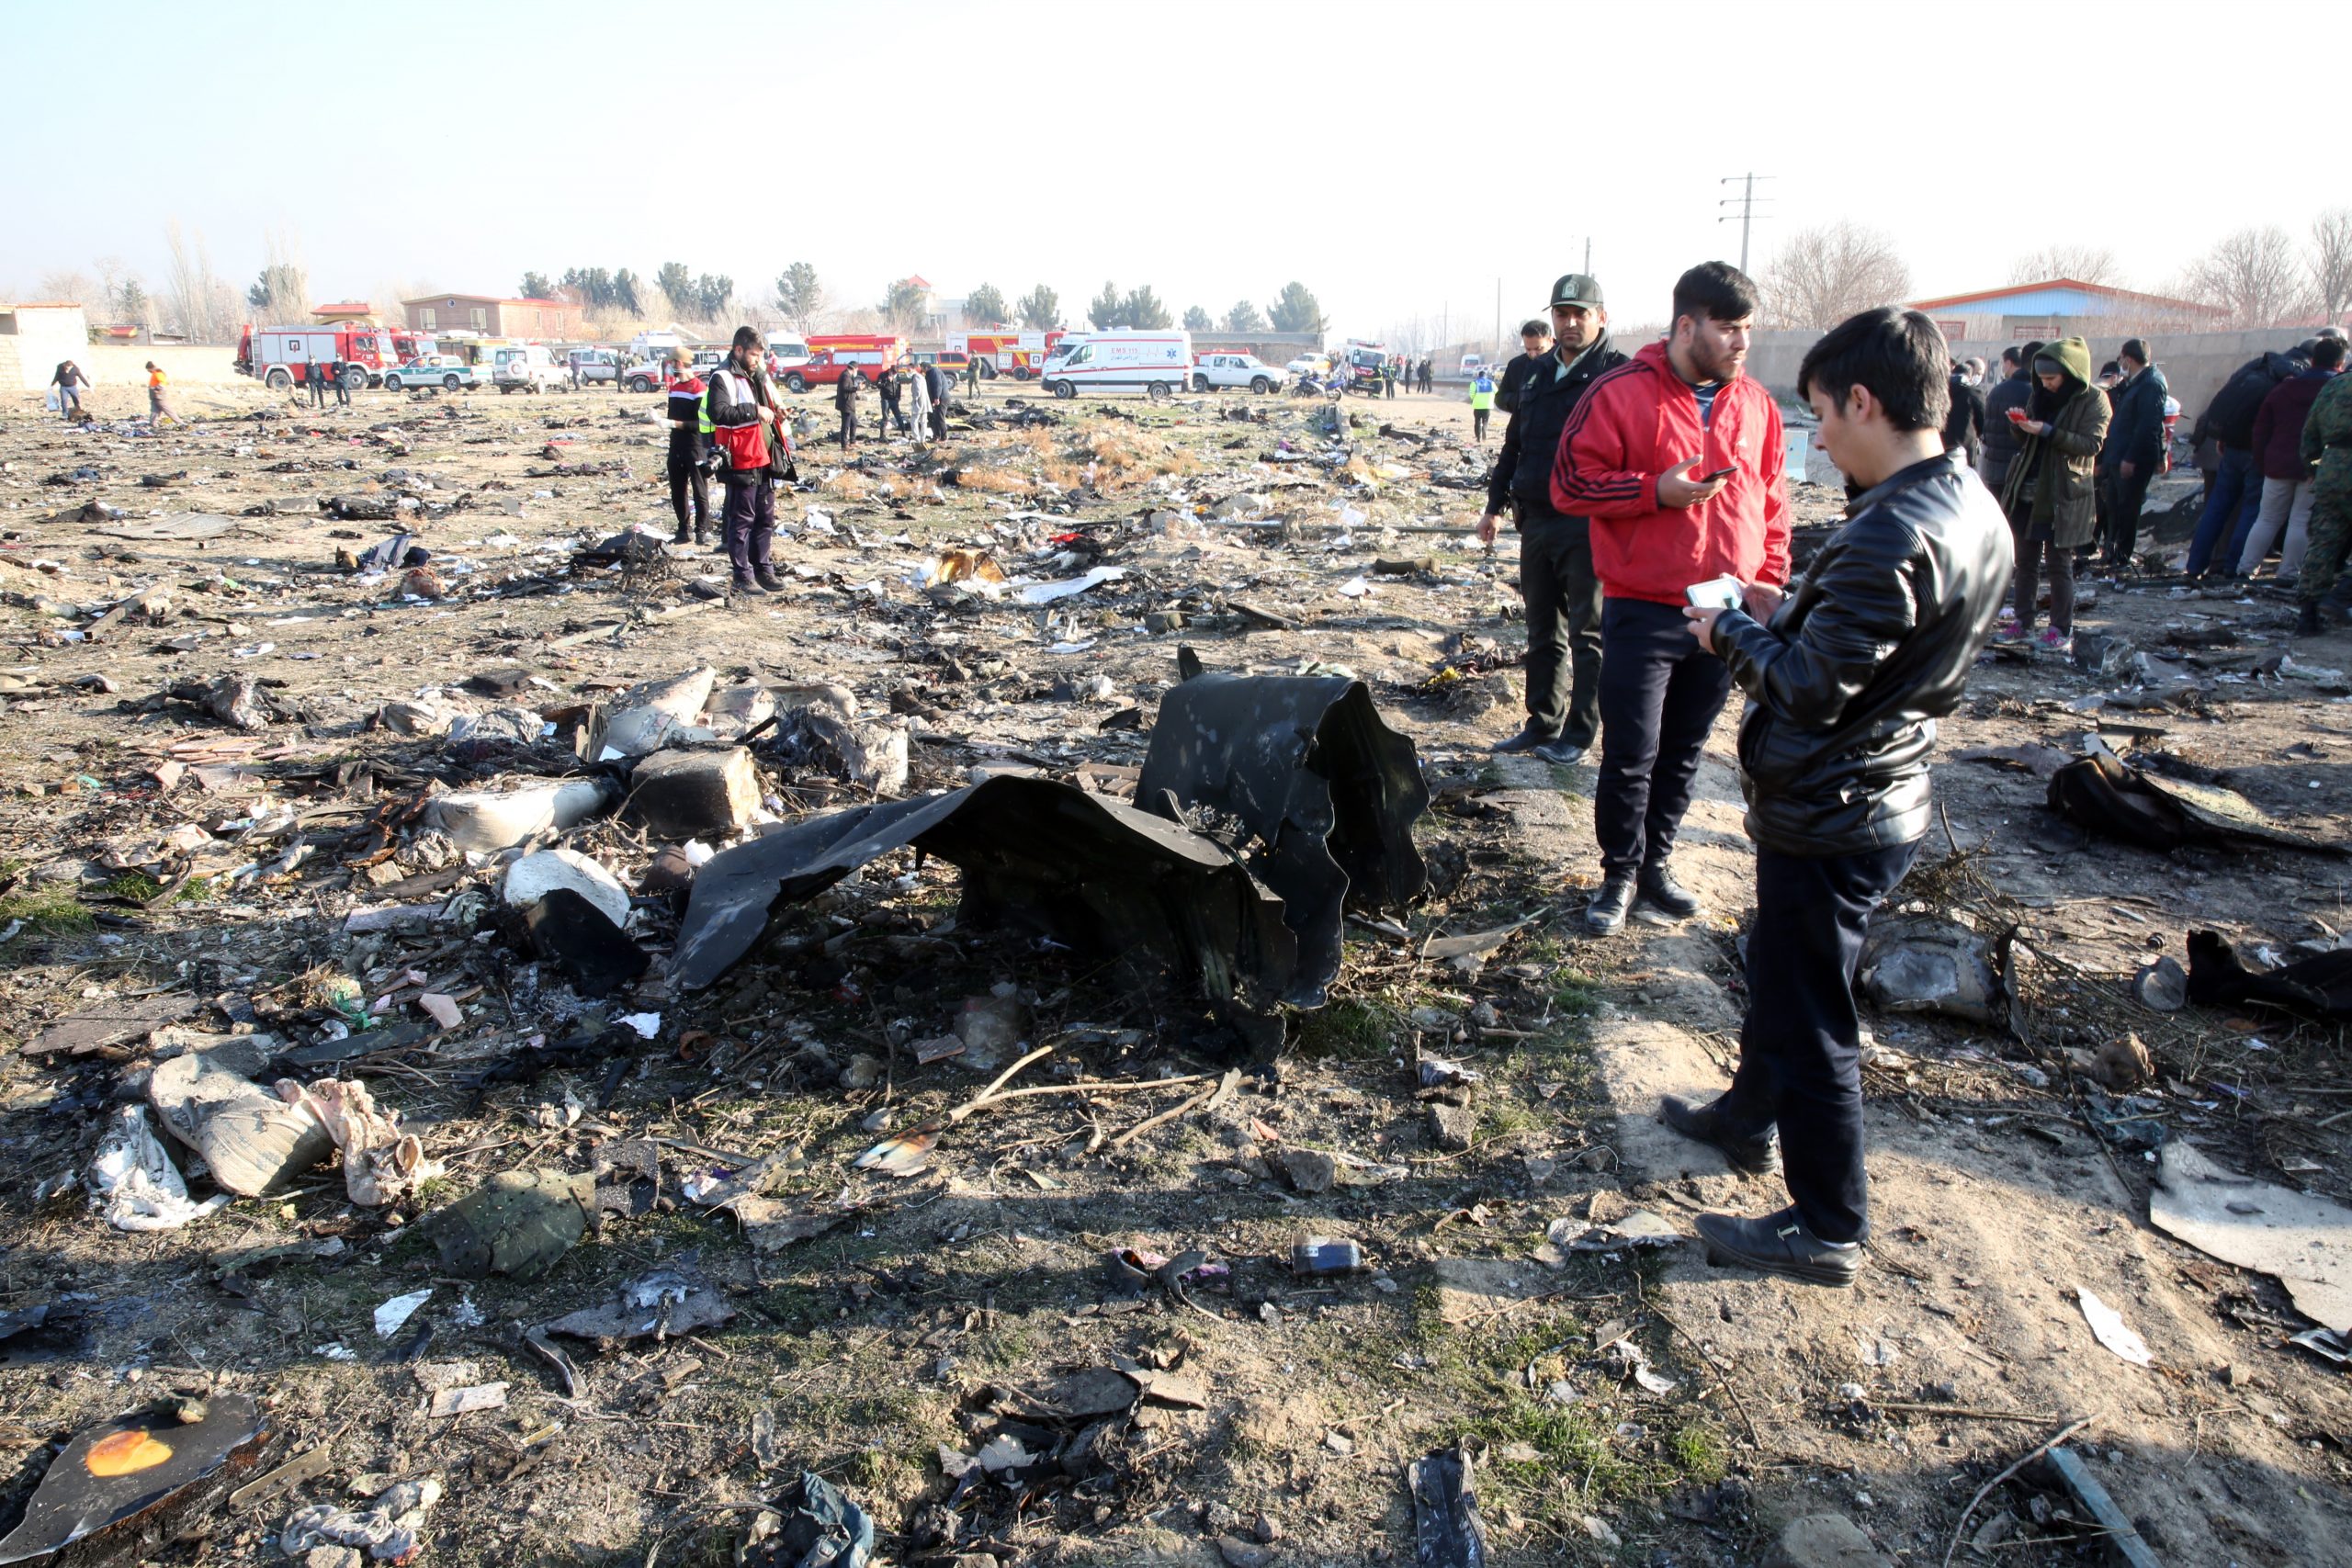 epa08111562 Emergency services personnel work amidst the wreckage after an Ukraine International Airlines Boeing 737-800 carrying 176 people crashed near Imam Khomeini Airport in Tehran, killing everyone on board; in Shahriar, Iran, 08 January 2020.  EPA/ABEDIN TAHERKENAREH